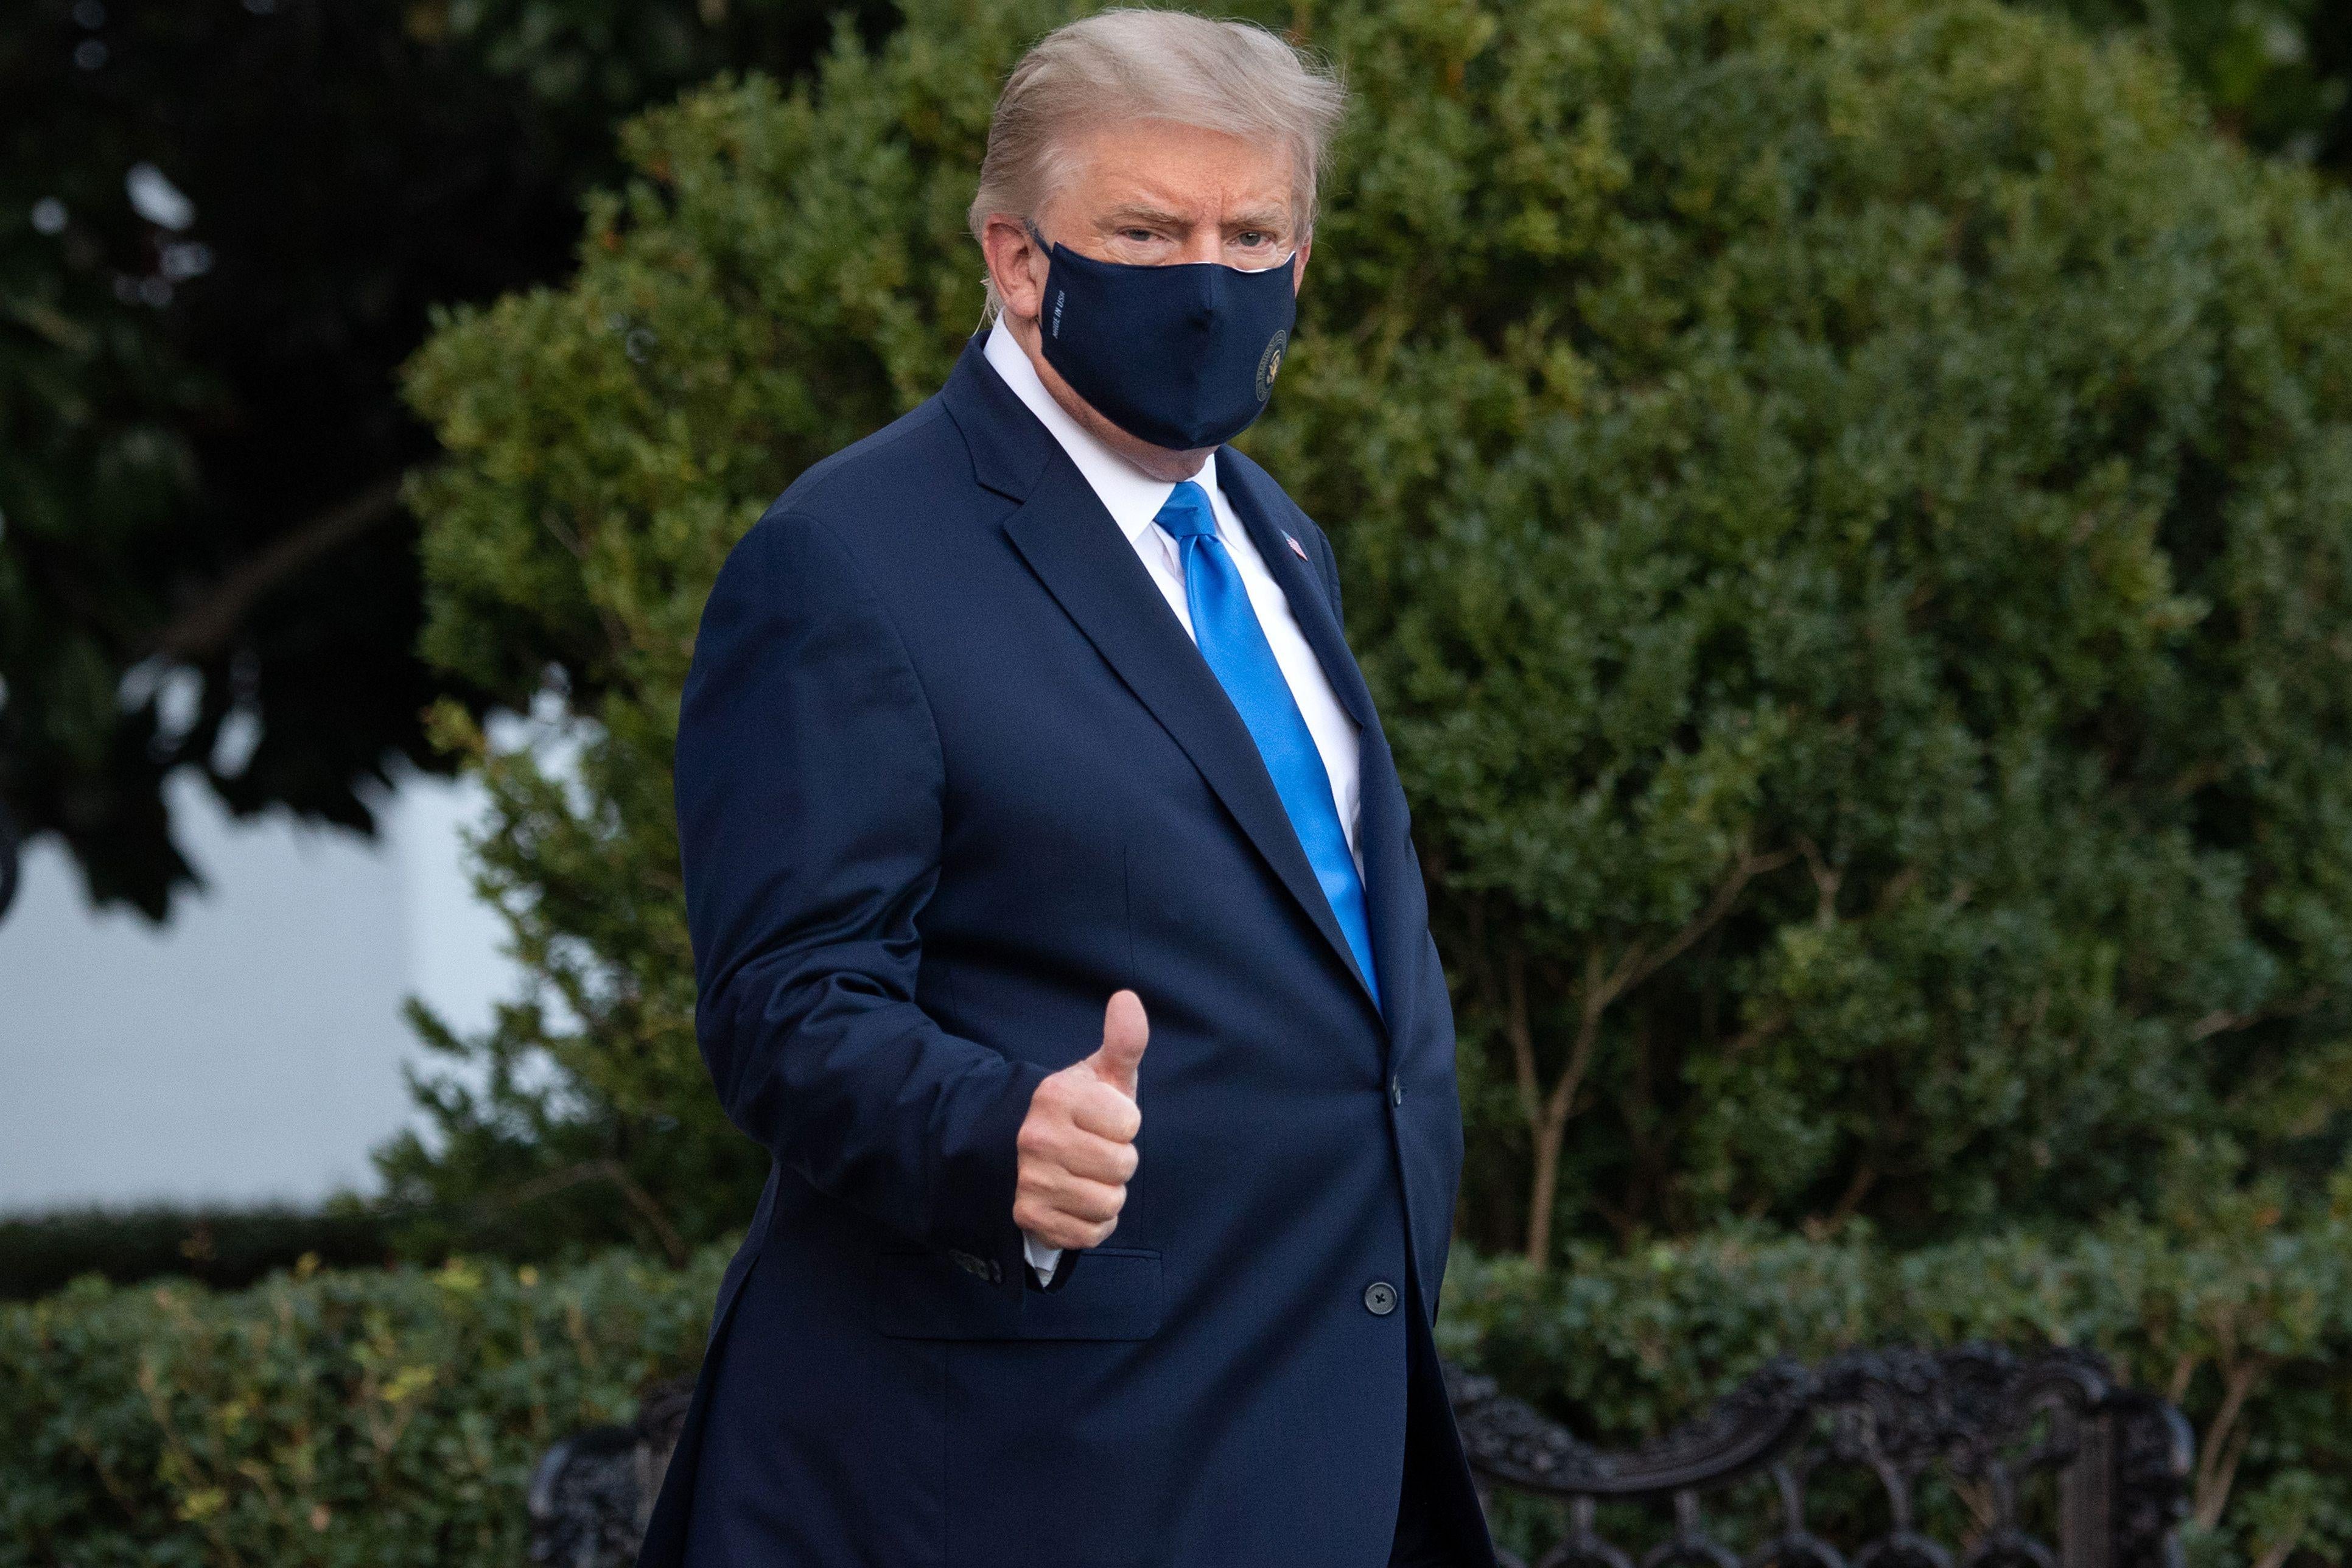 Trump gives a thumbs-up while wearing a mask.